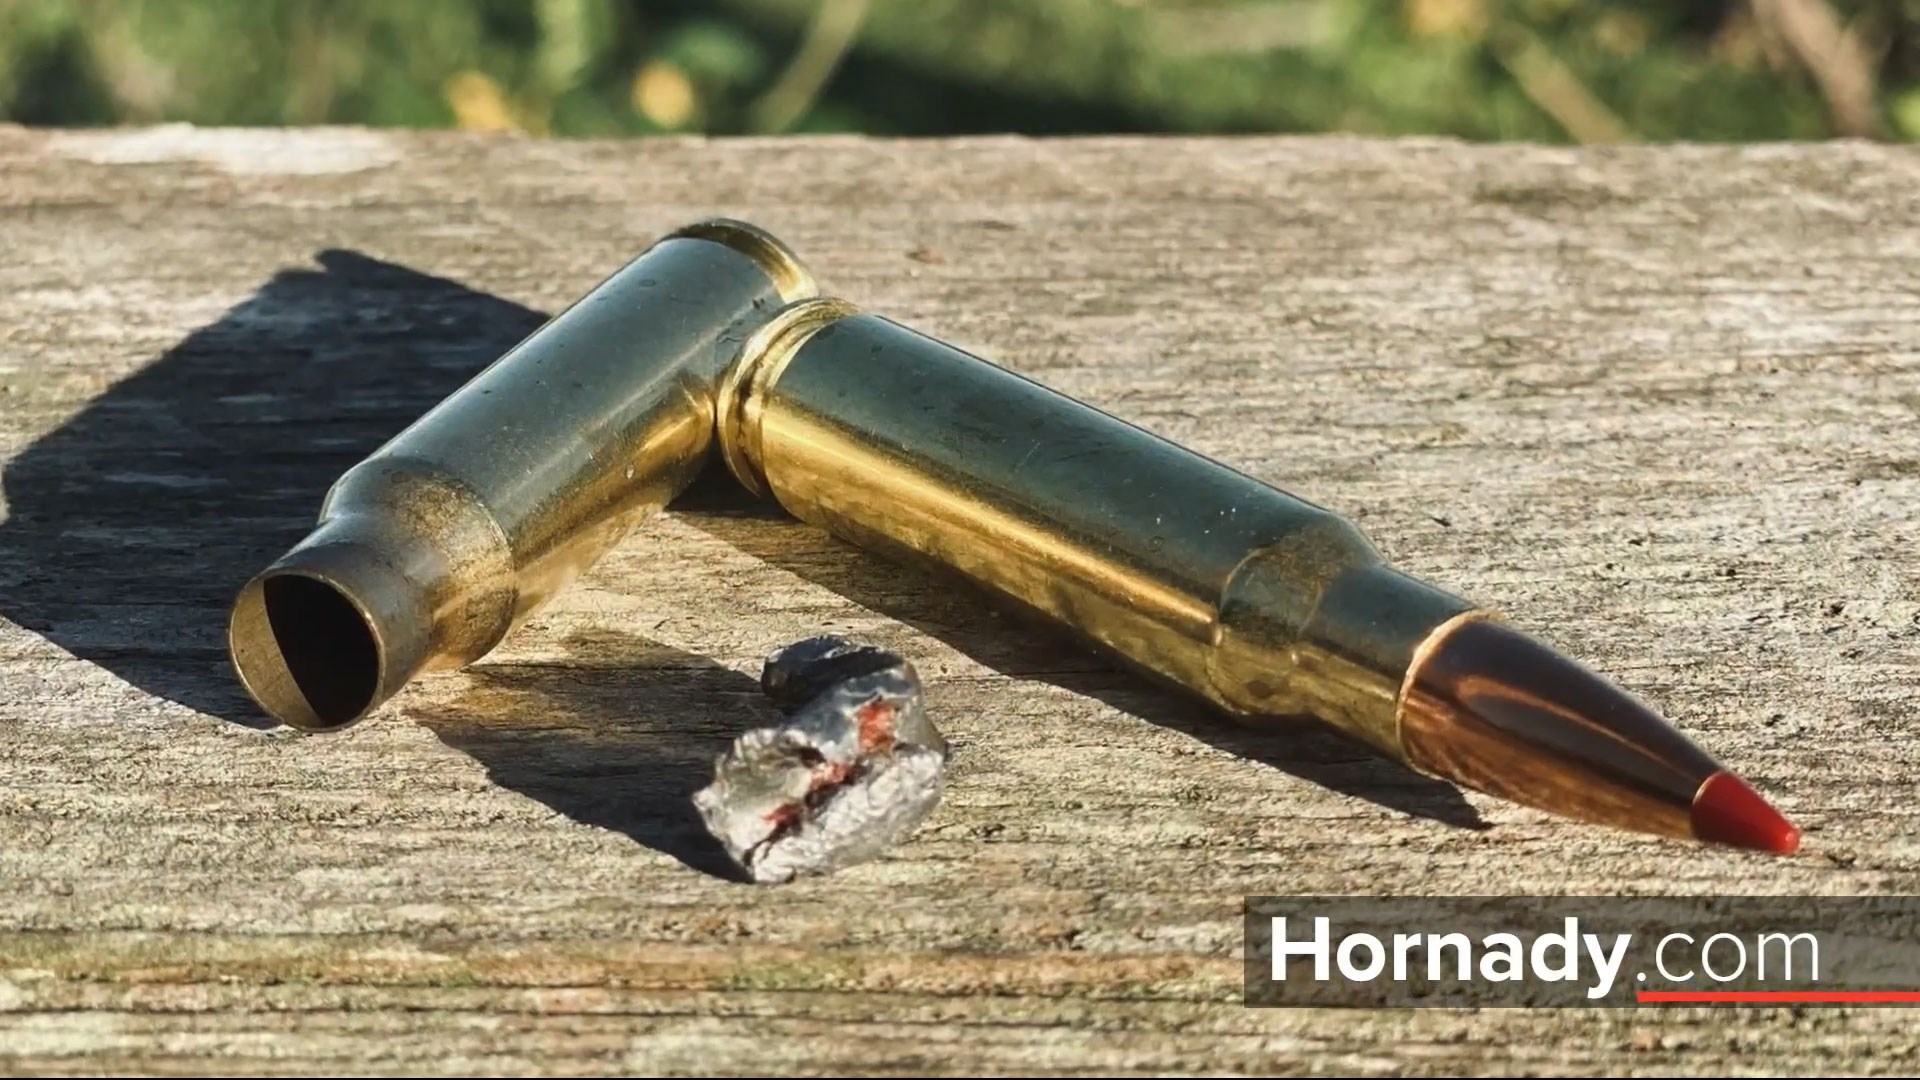 Hornady Precision Hunter with mushroomed projectile